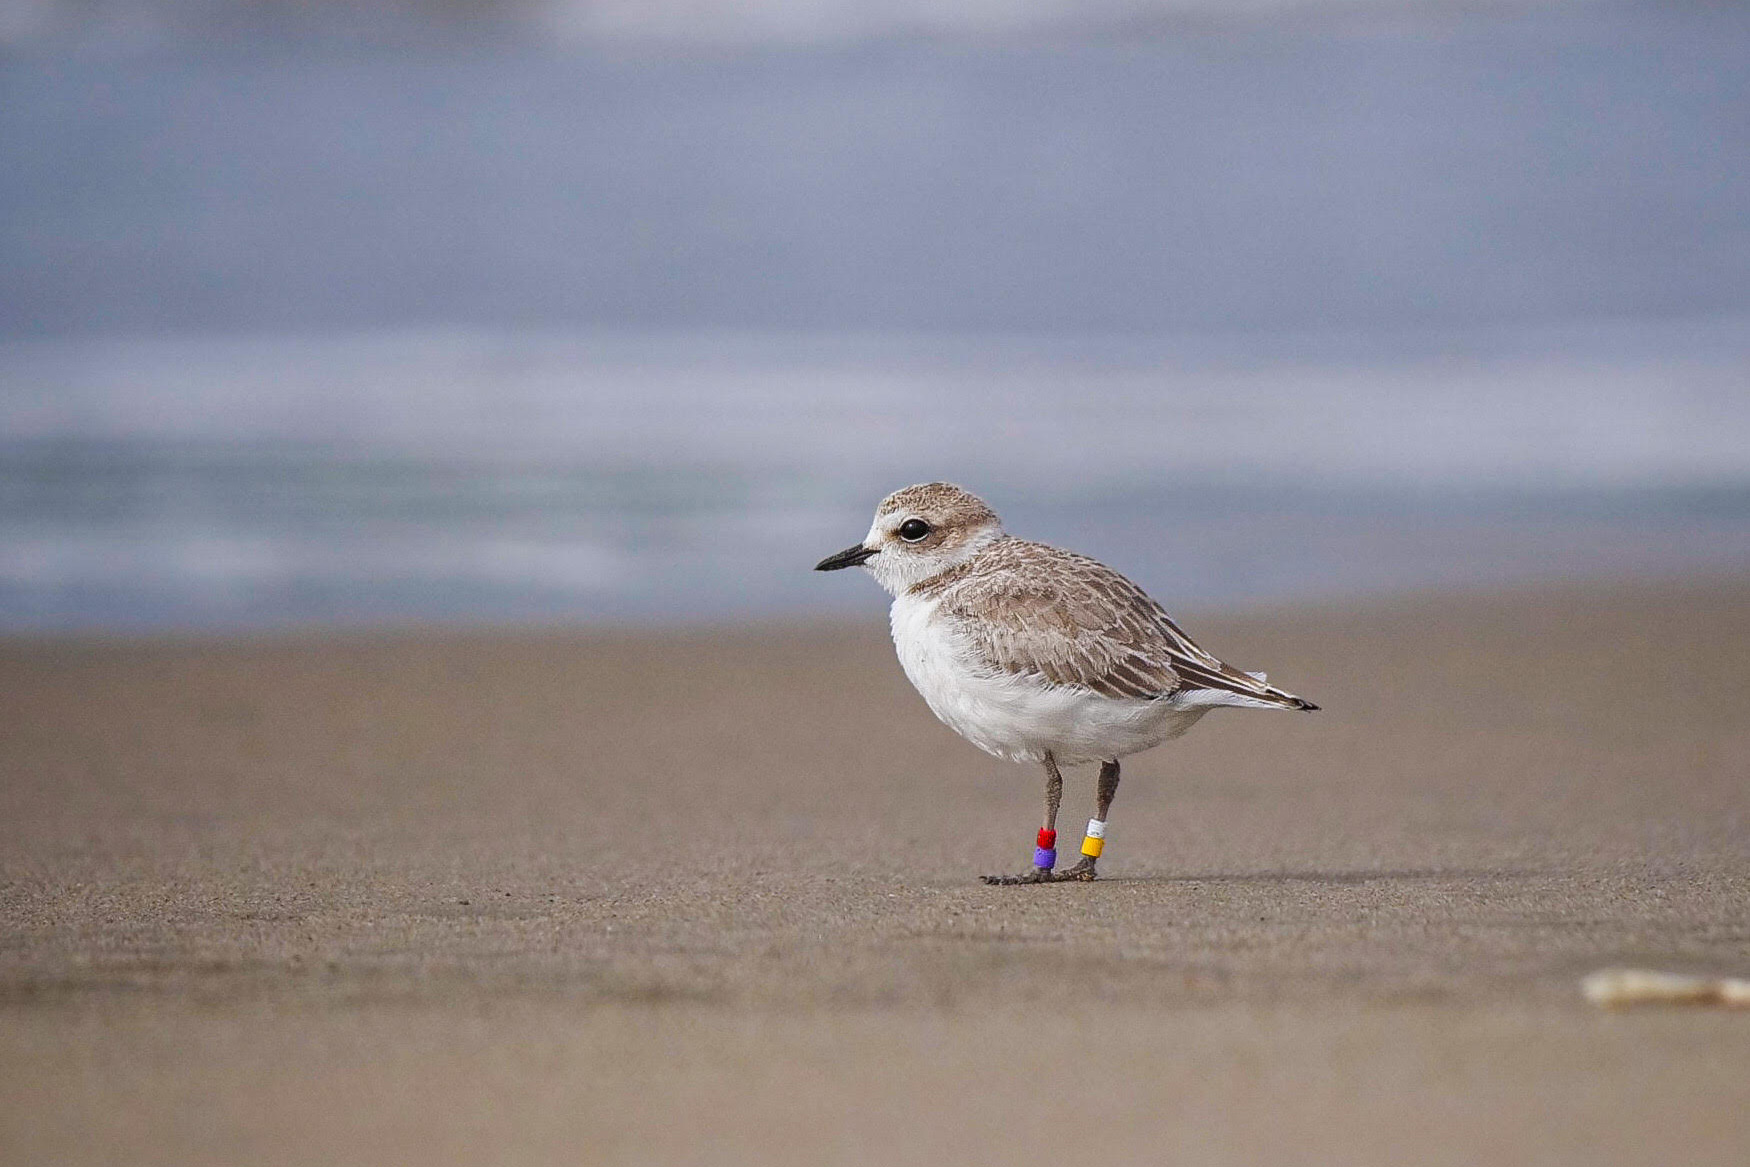 A photo of a small grayish-brown shorebird with colored bands around its legs standing on a sandy beach.